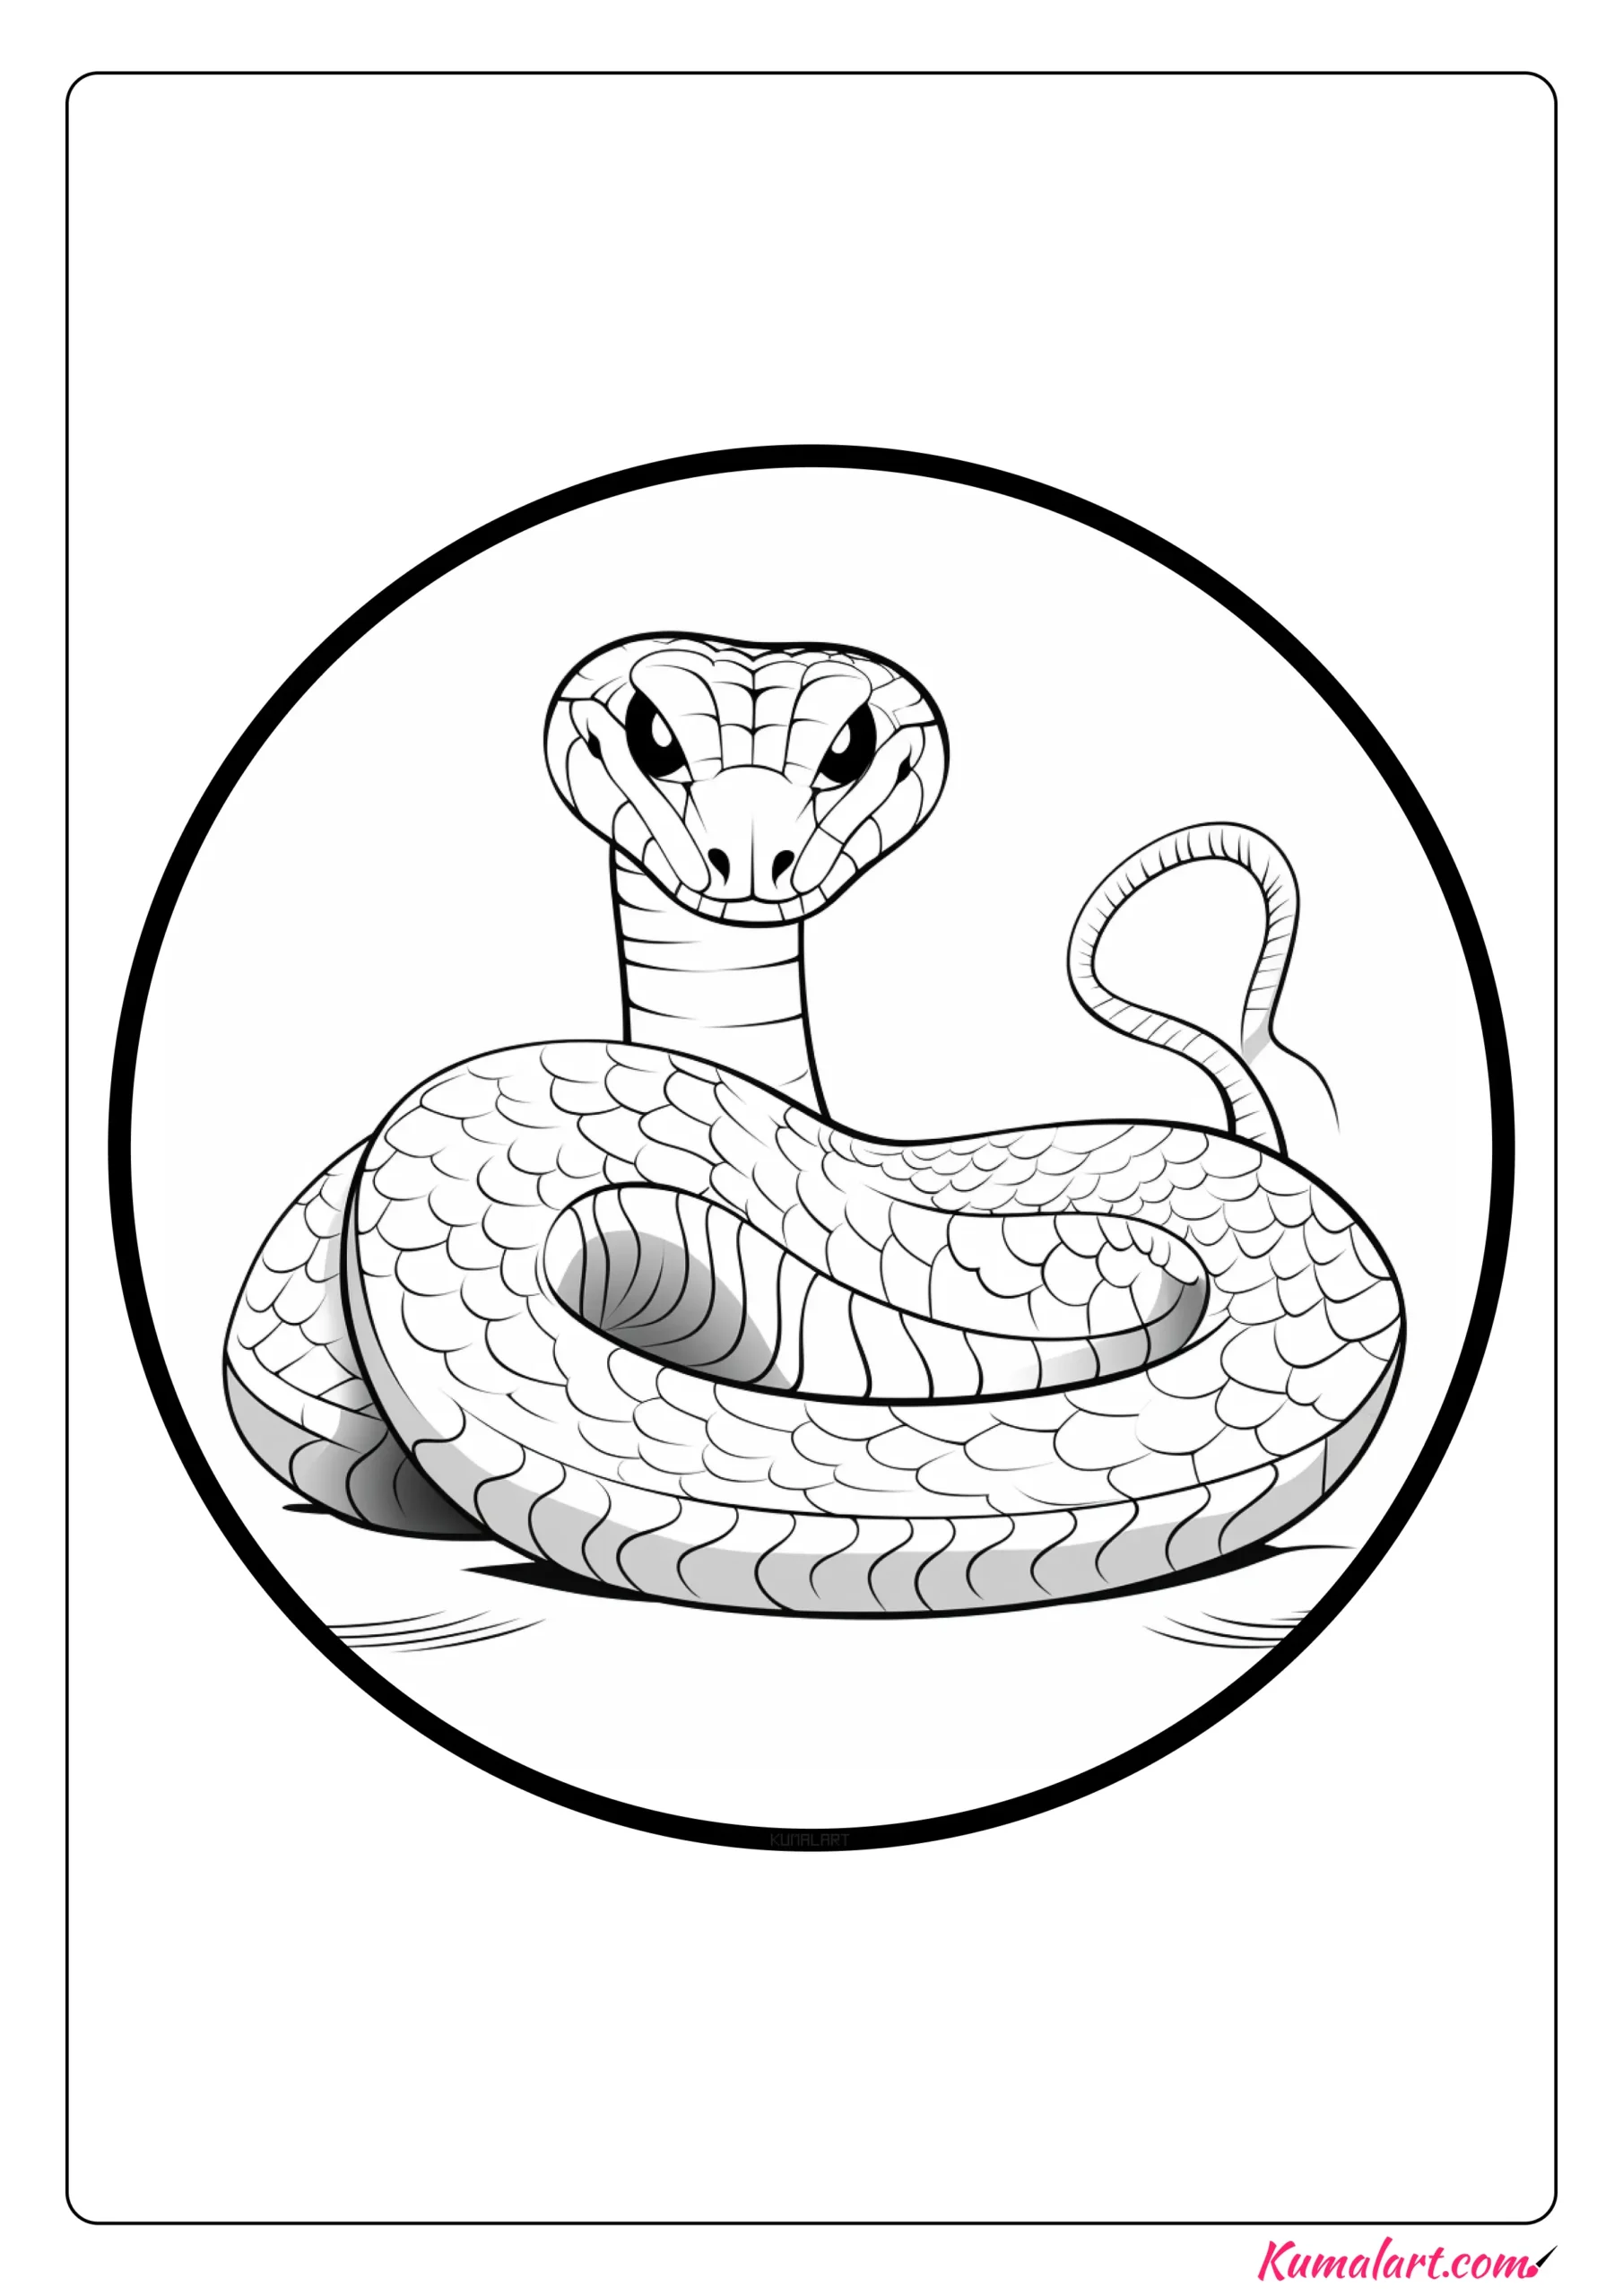 Mojave Rattle Snake Coloring Page